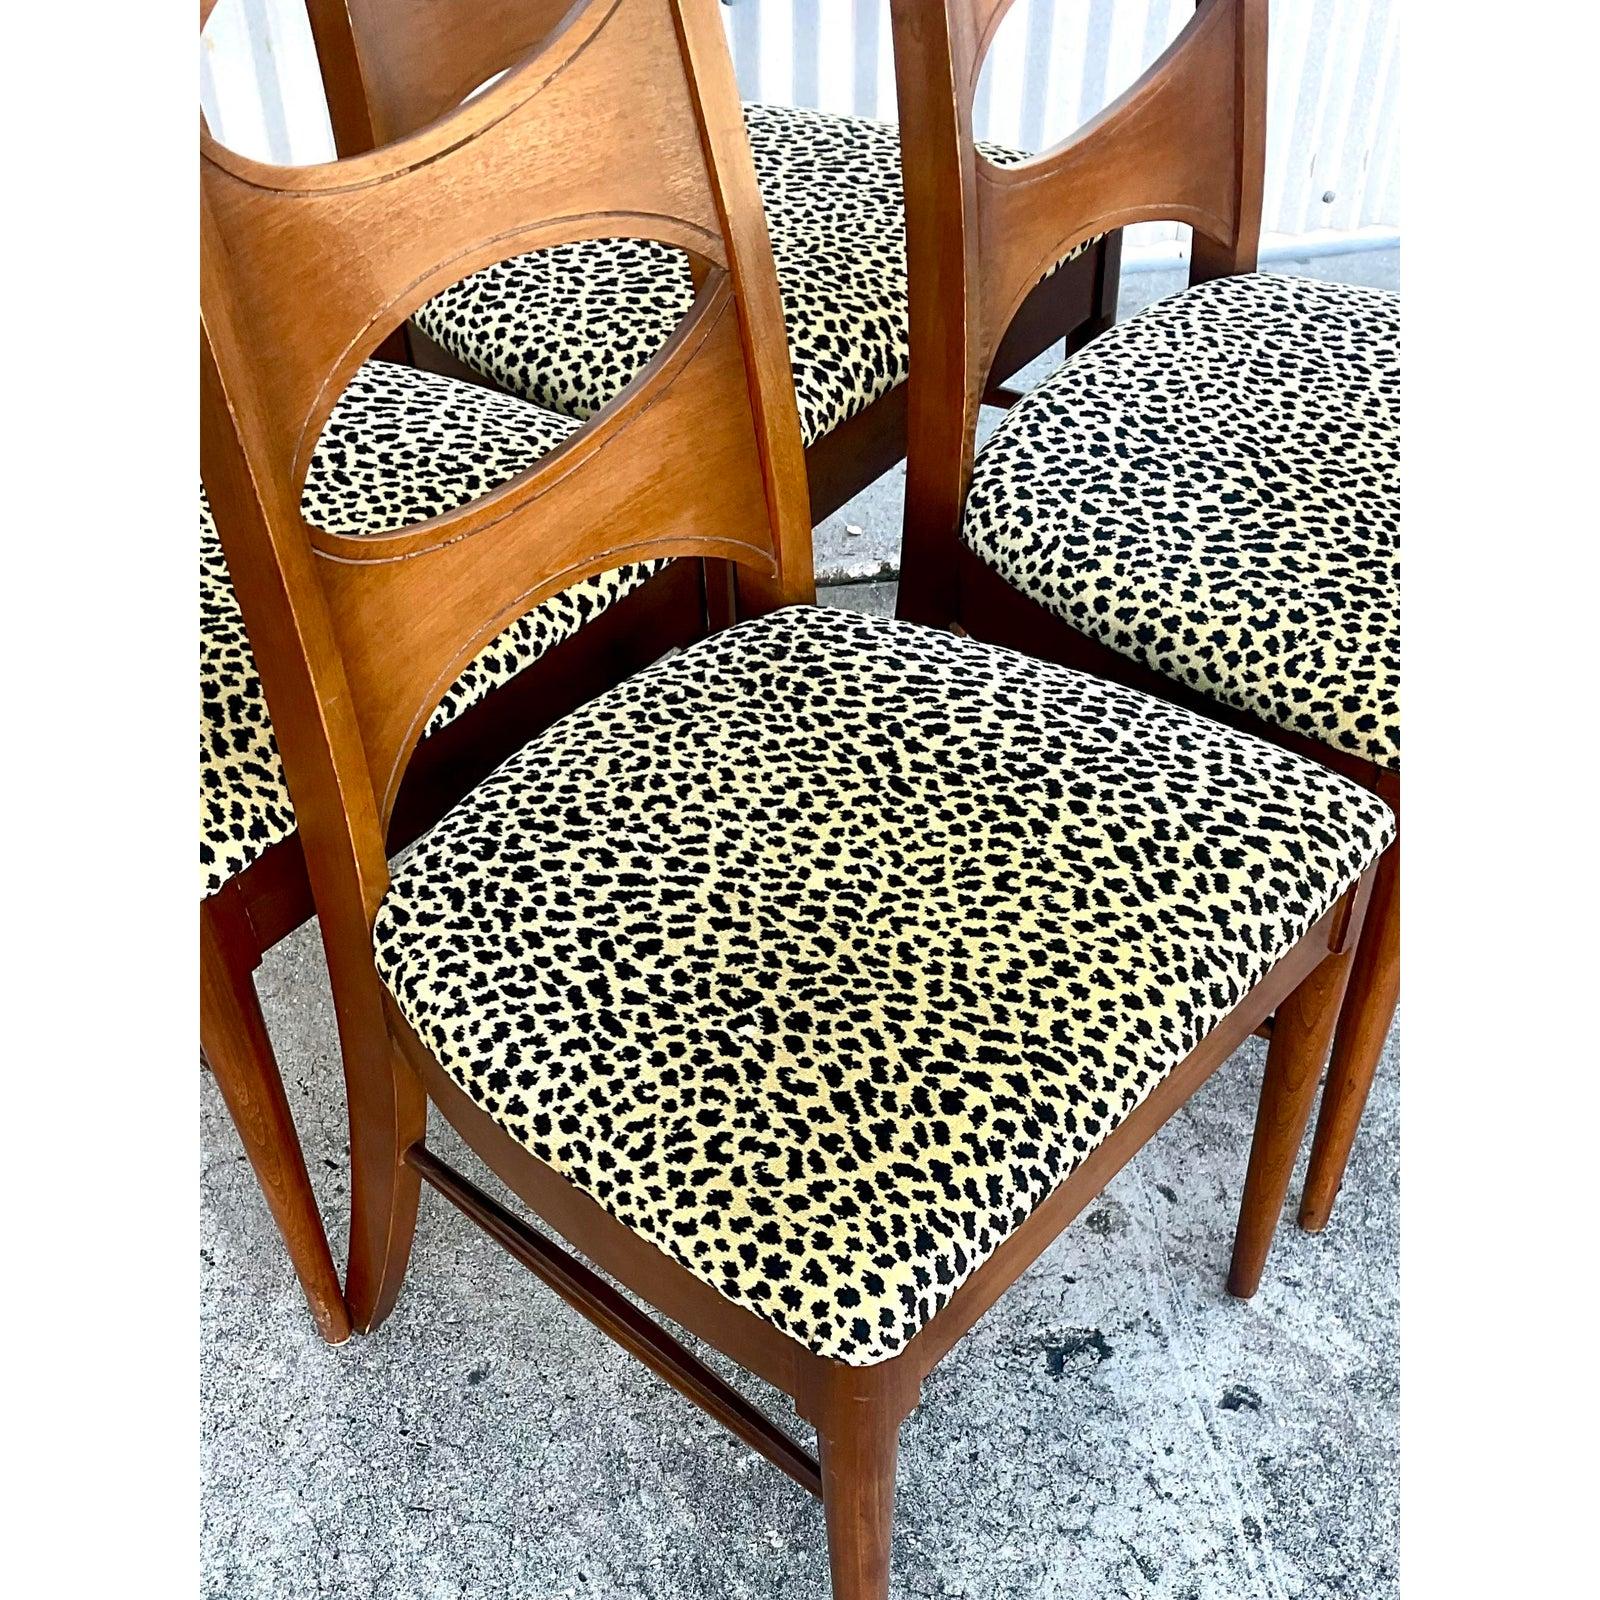 North American Midcentury Kent Coffey Perspecta “Cats Eye” Dining Chairs, Set of 4